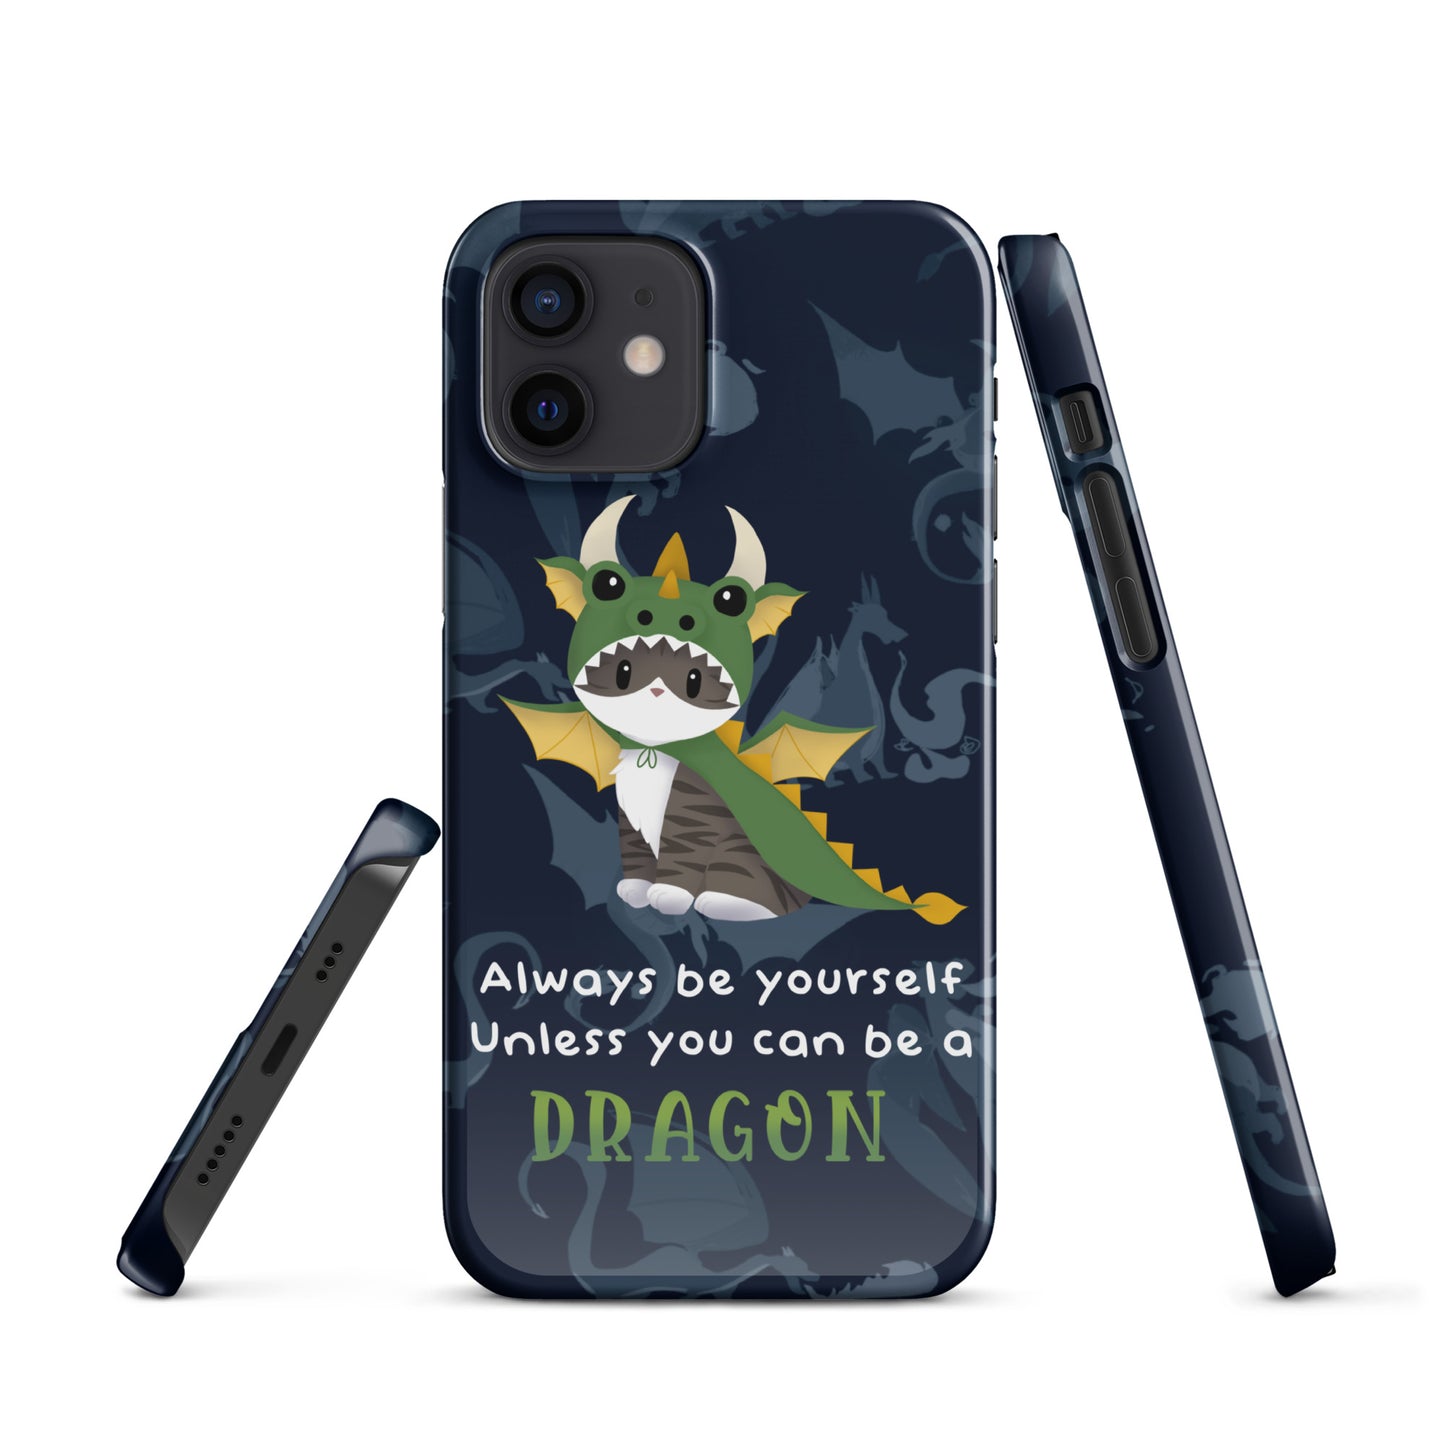 Jack the Dragon Kitty iPhone Snap Case